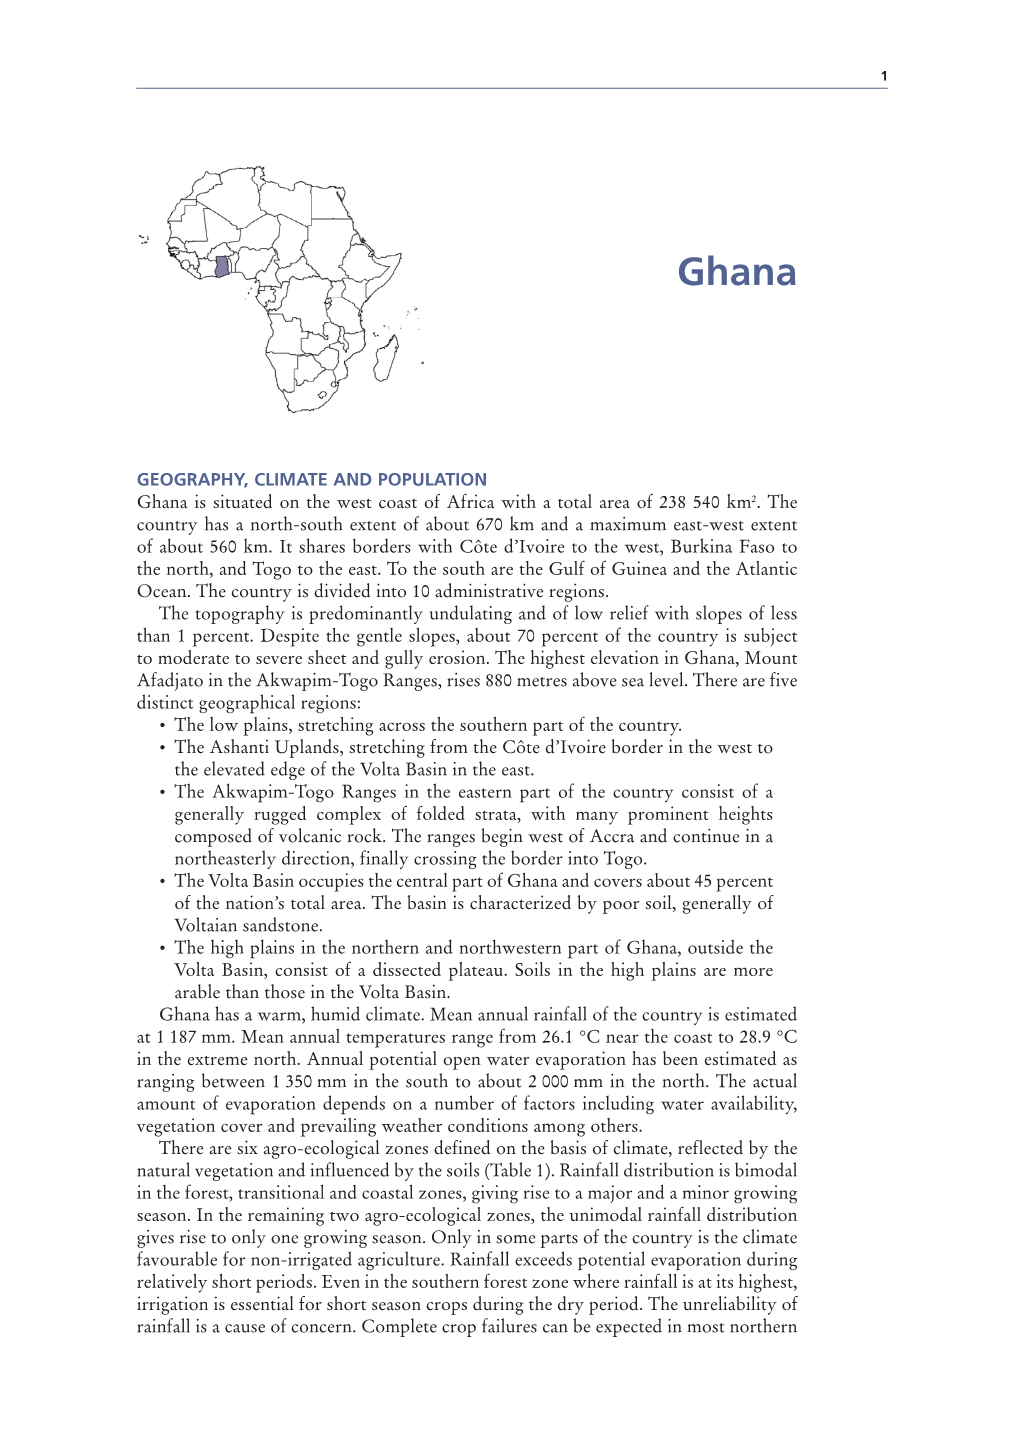 GEOGRAPHY, CLIMATE and POPULATION Ghana Is Situated on the West Coast of Africa with a Total Area of 238 540 Km2